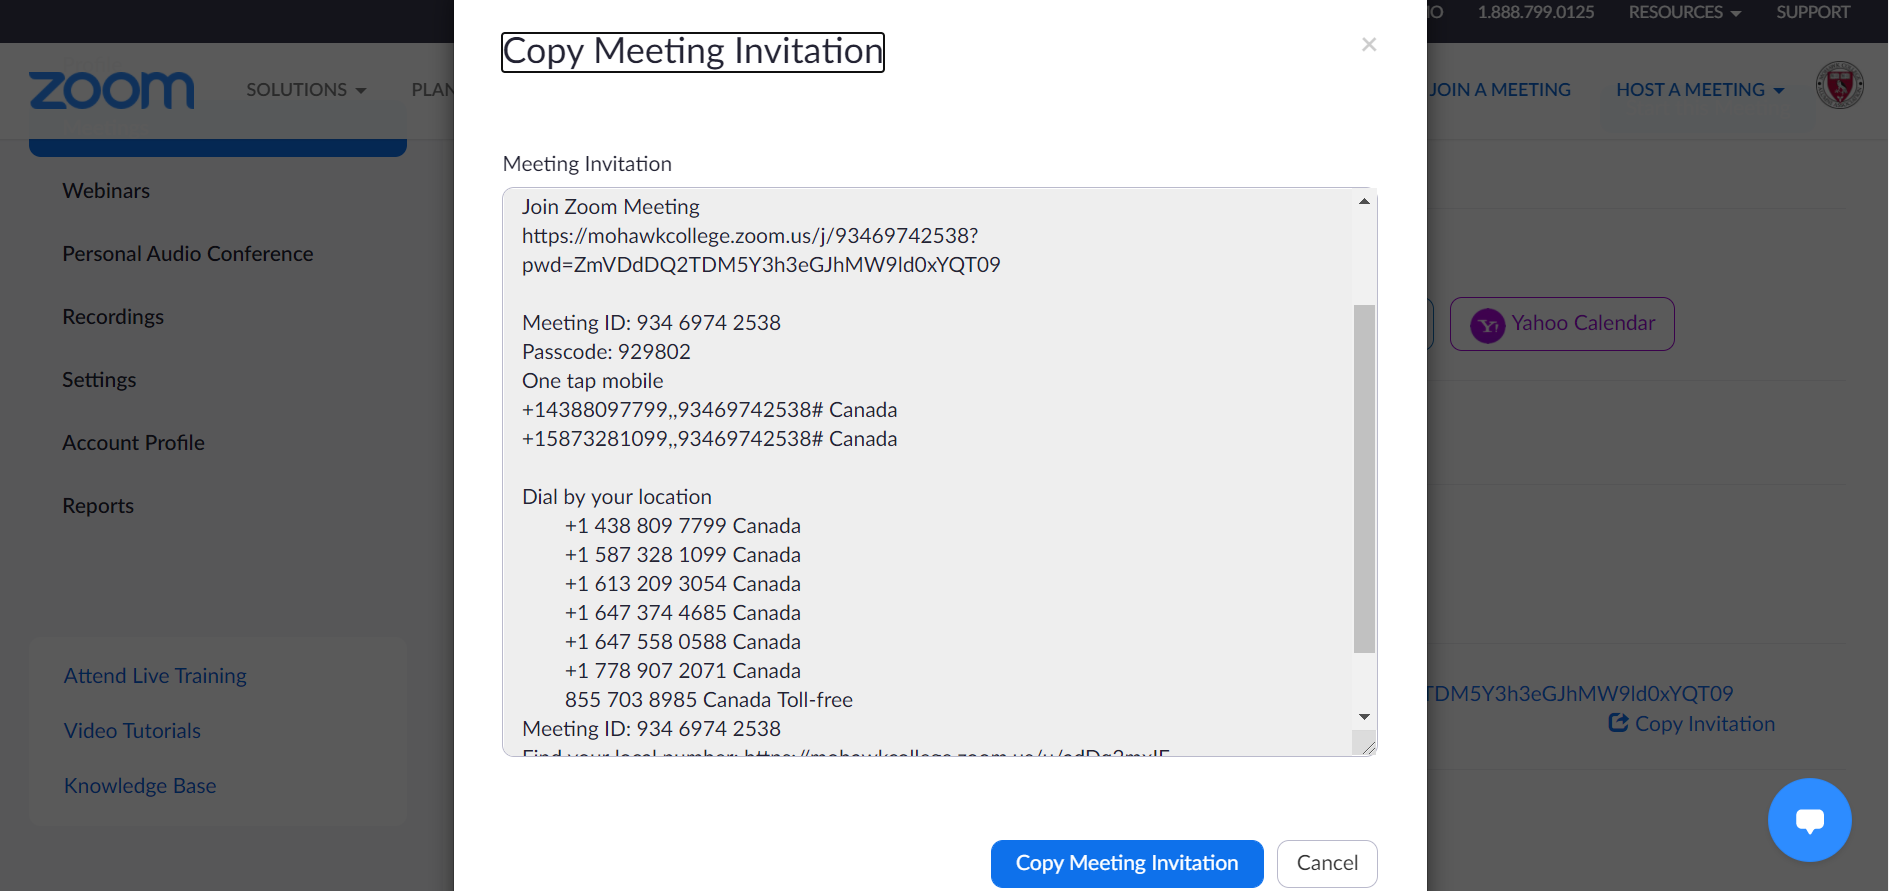 Copying invitation in Zoom to invite others